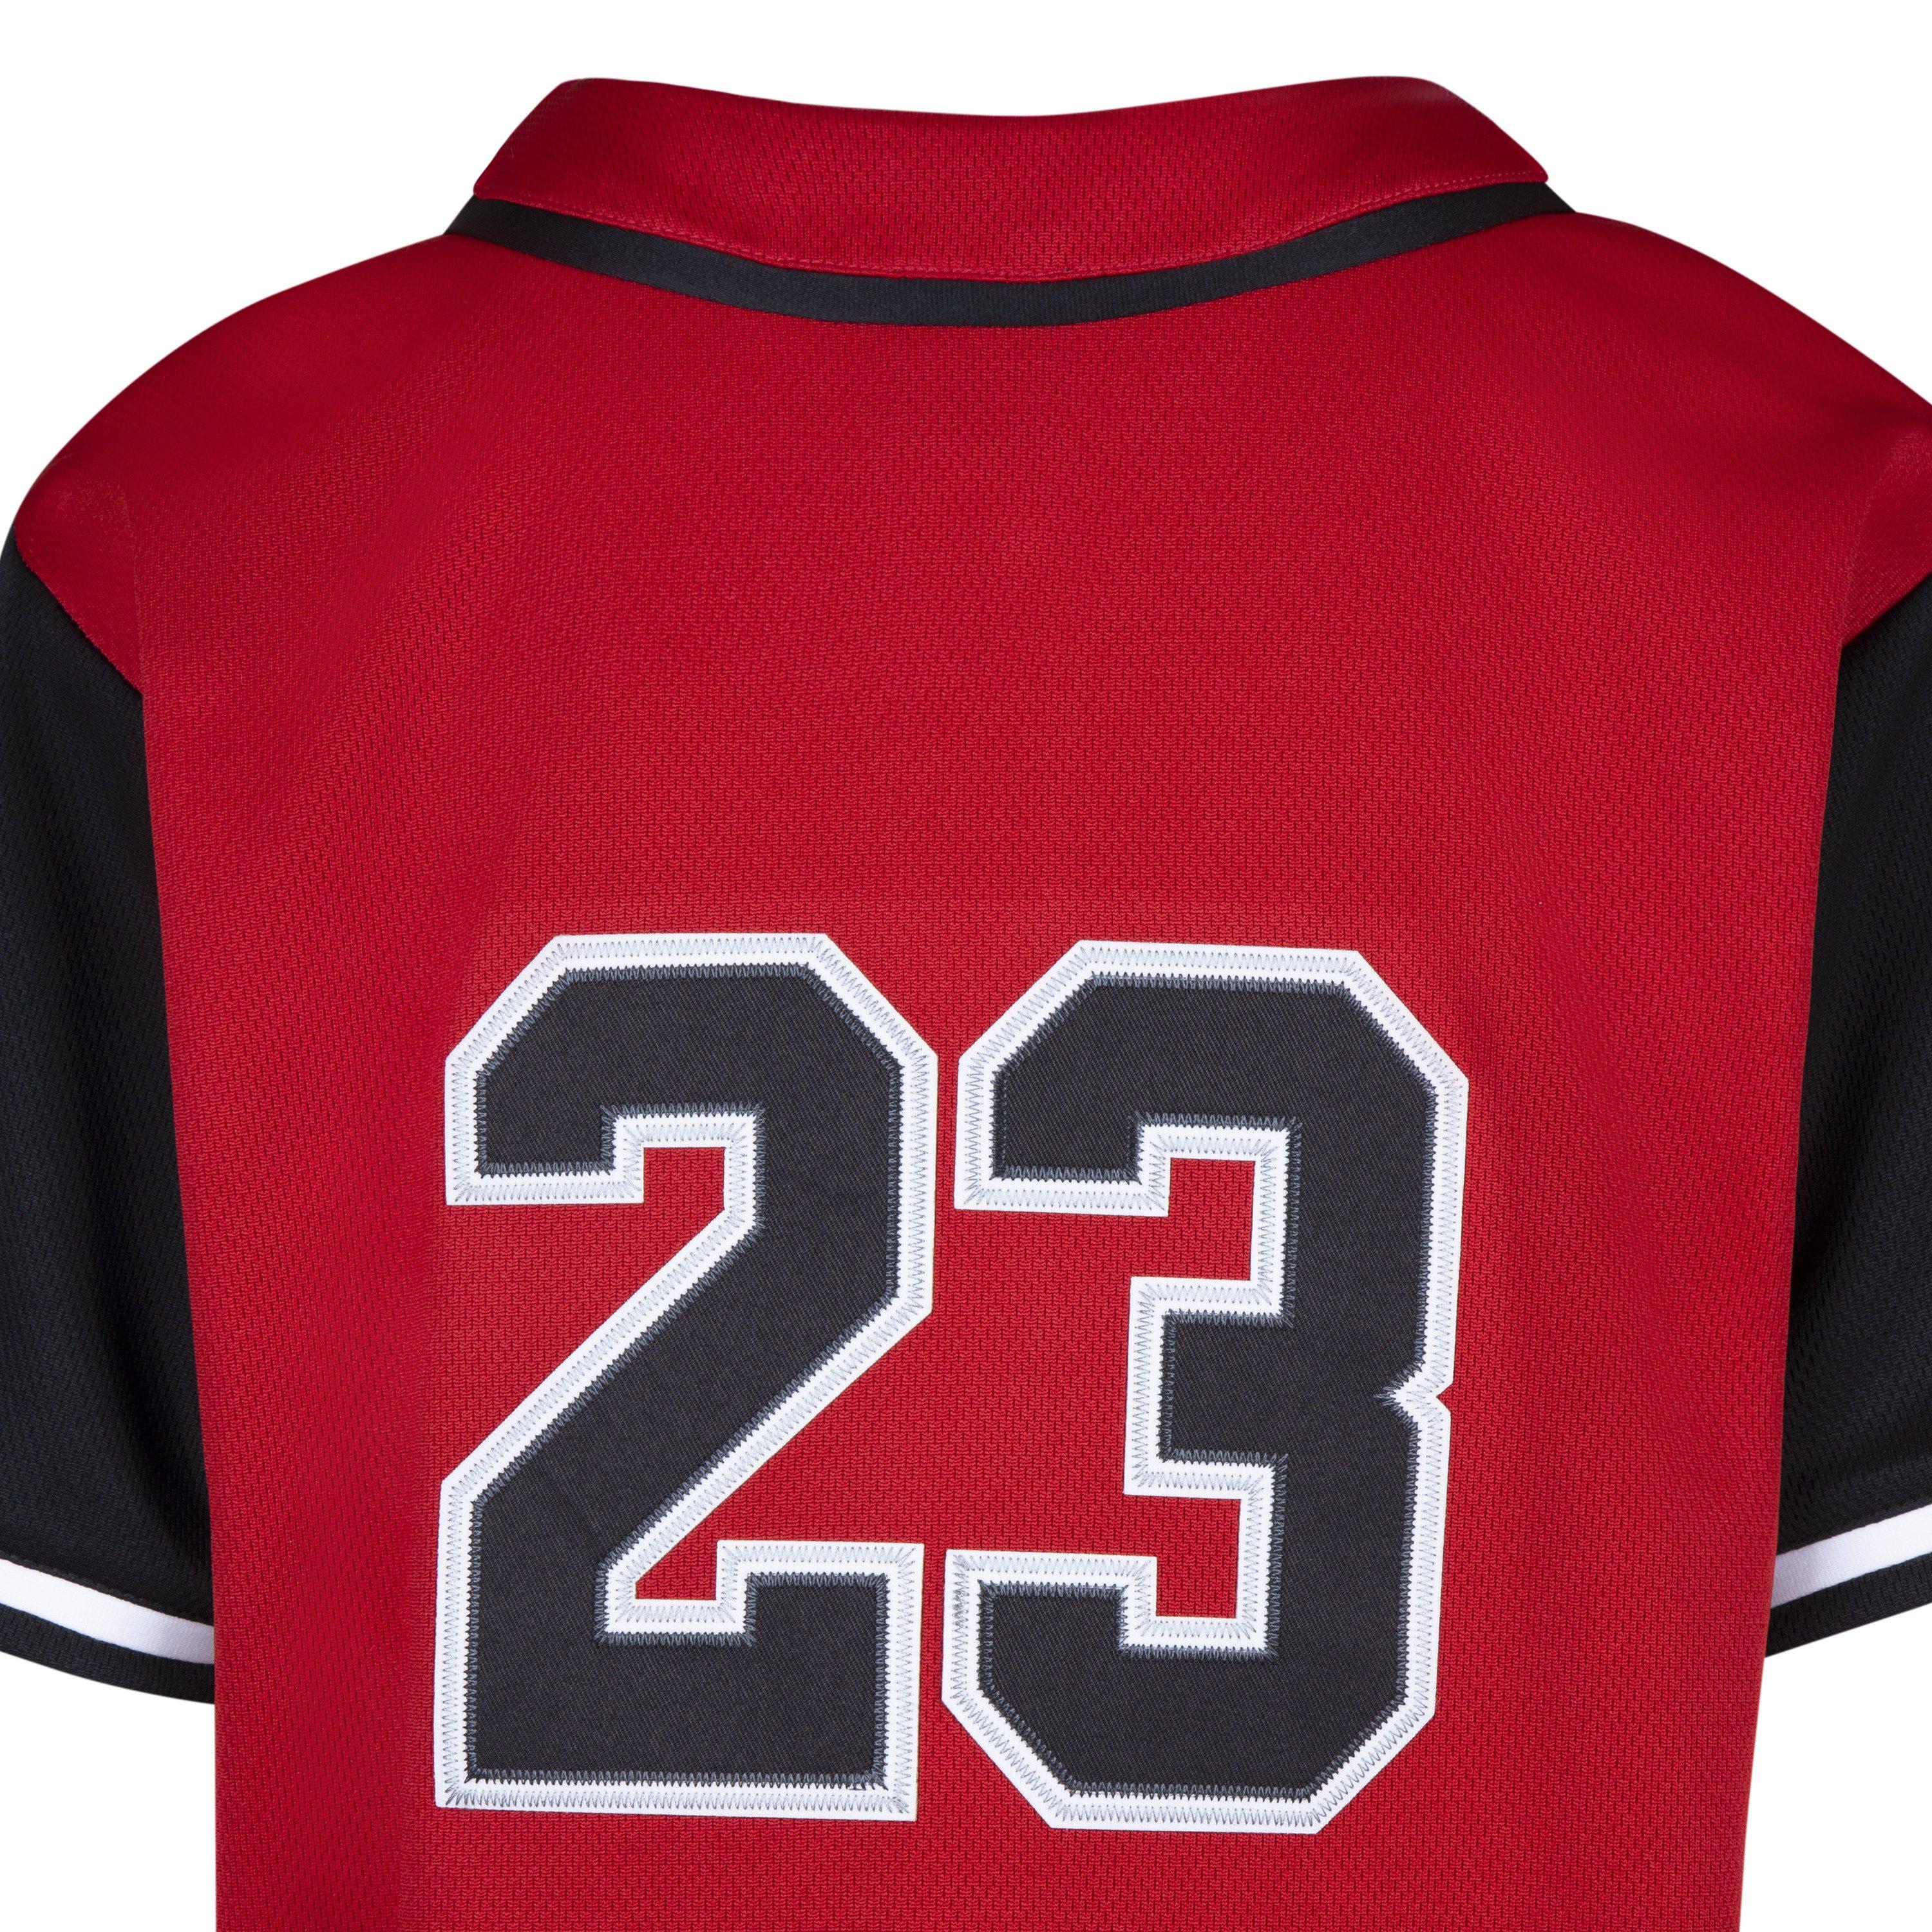 Jordan HBR Baseball Jersey - Youth in Gym Red Size S | WSS